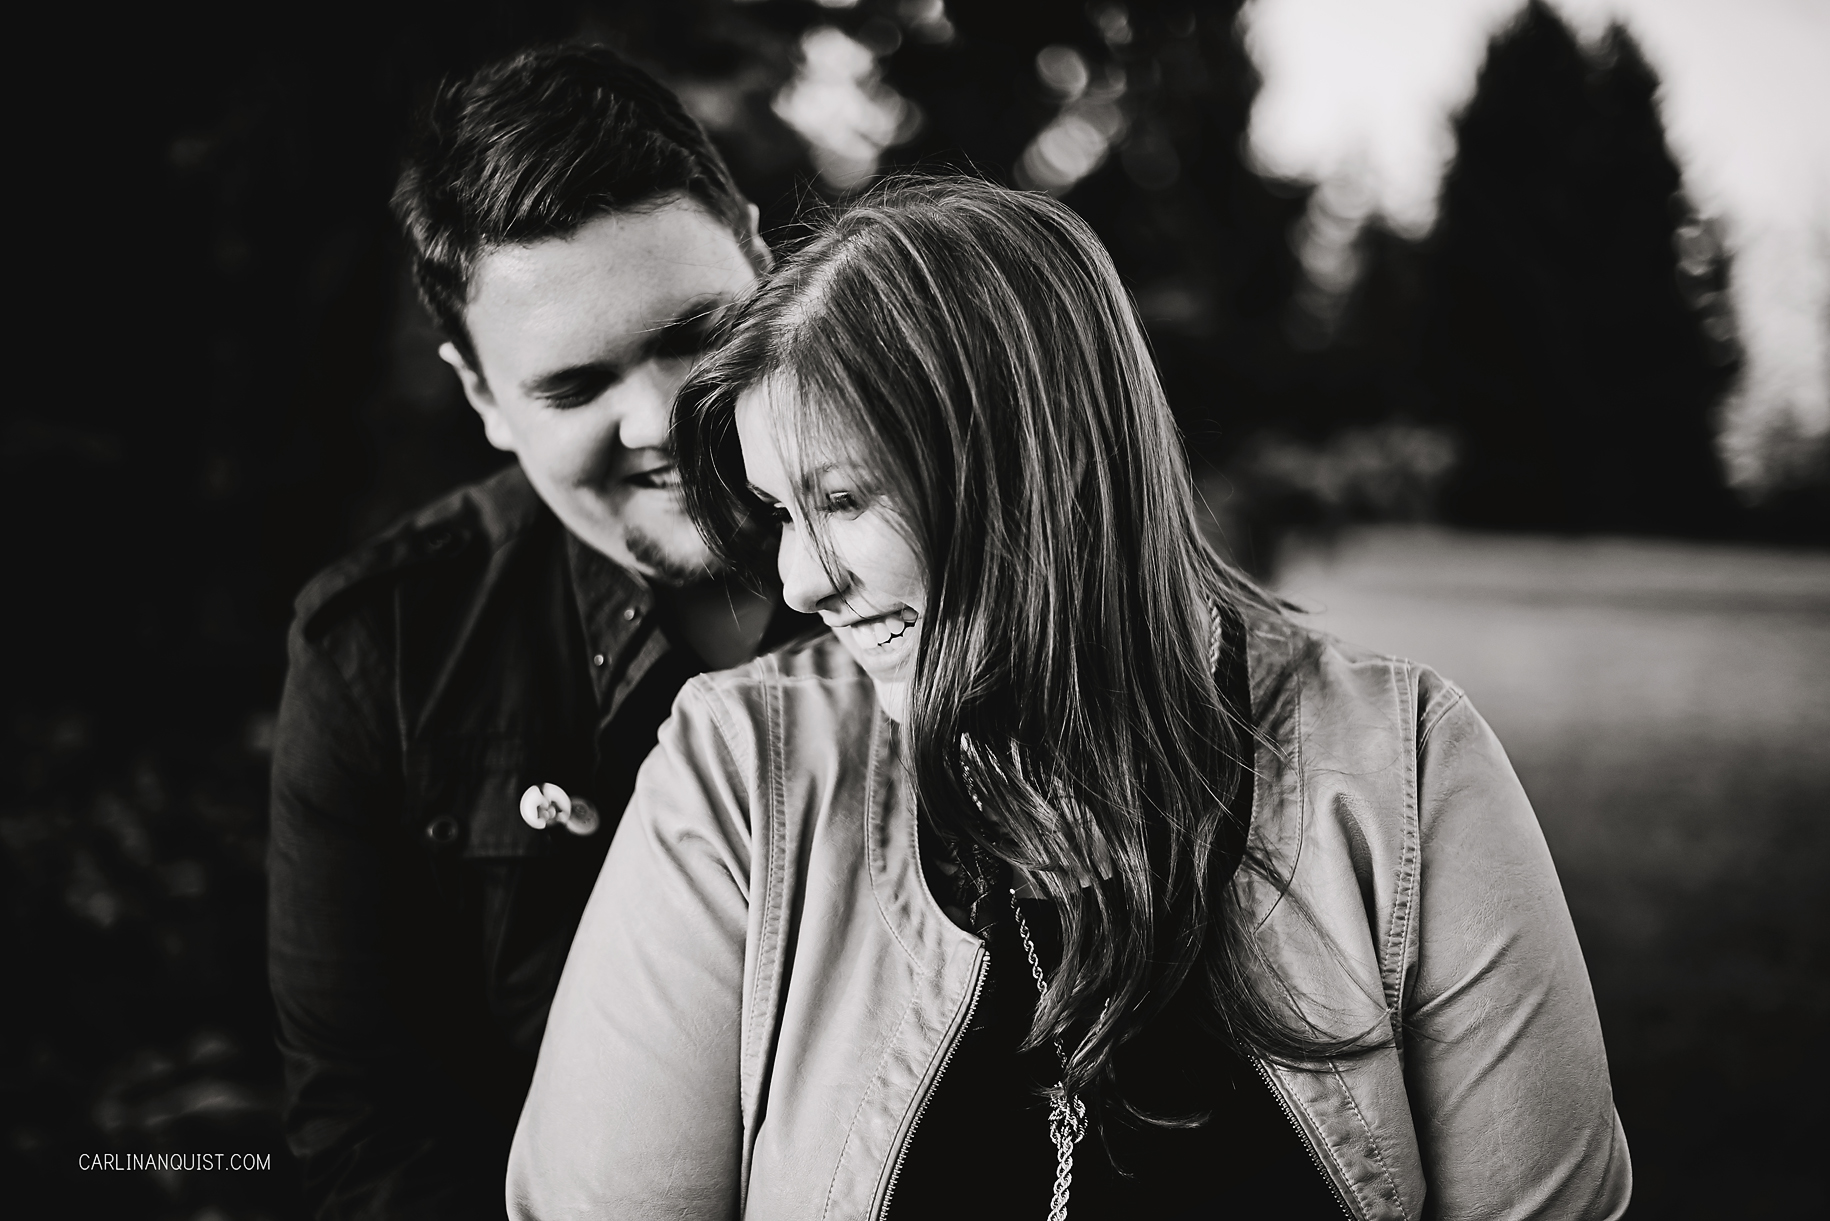 Sunset Engagement Session | Calgary Wedding Photographers | Carlin Anquist Photography